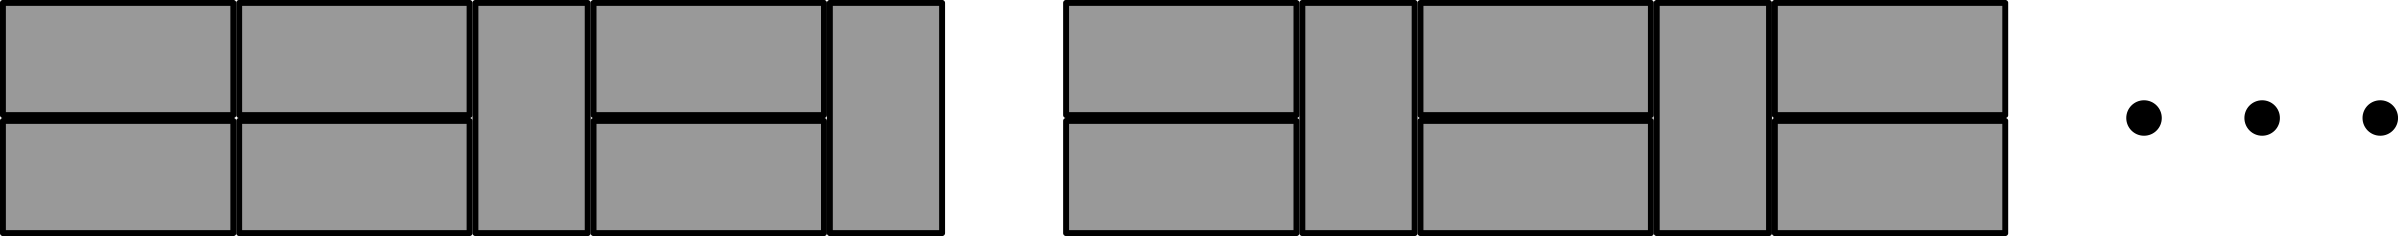 One arrangement has two pairs of horizontal rectangles, then a vertical rectangle, then a pair of horizontal rectangles, then a vertical rectangle. The other alternates between two horizontal rectangles and one vertical rectangle.